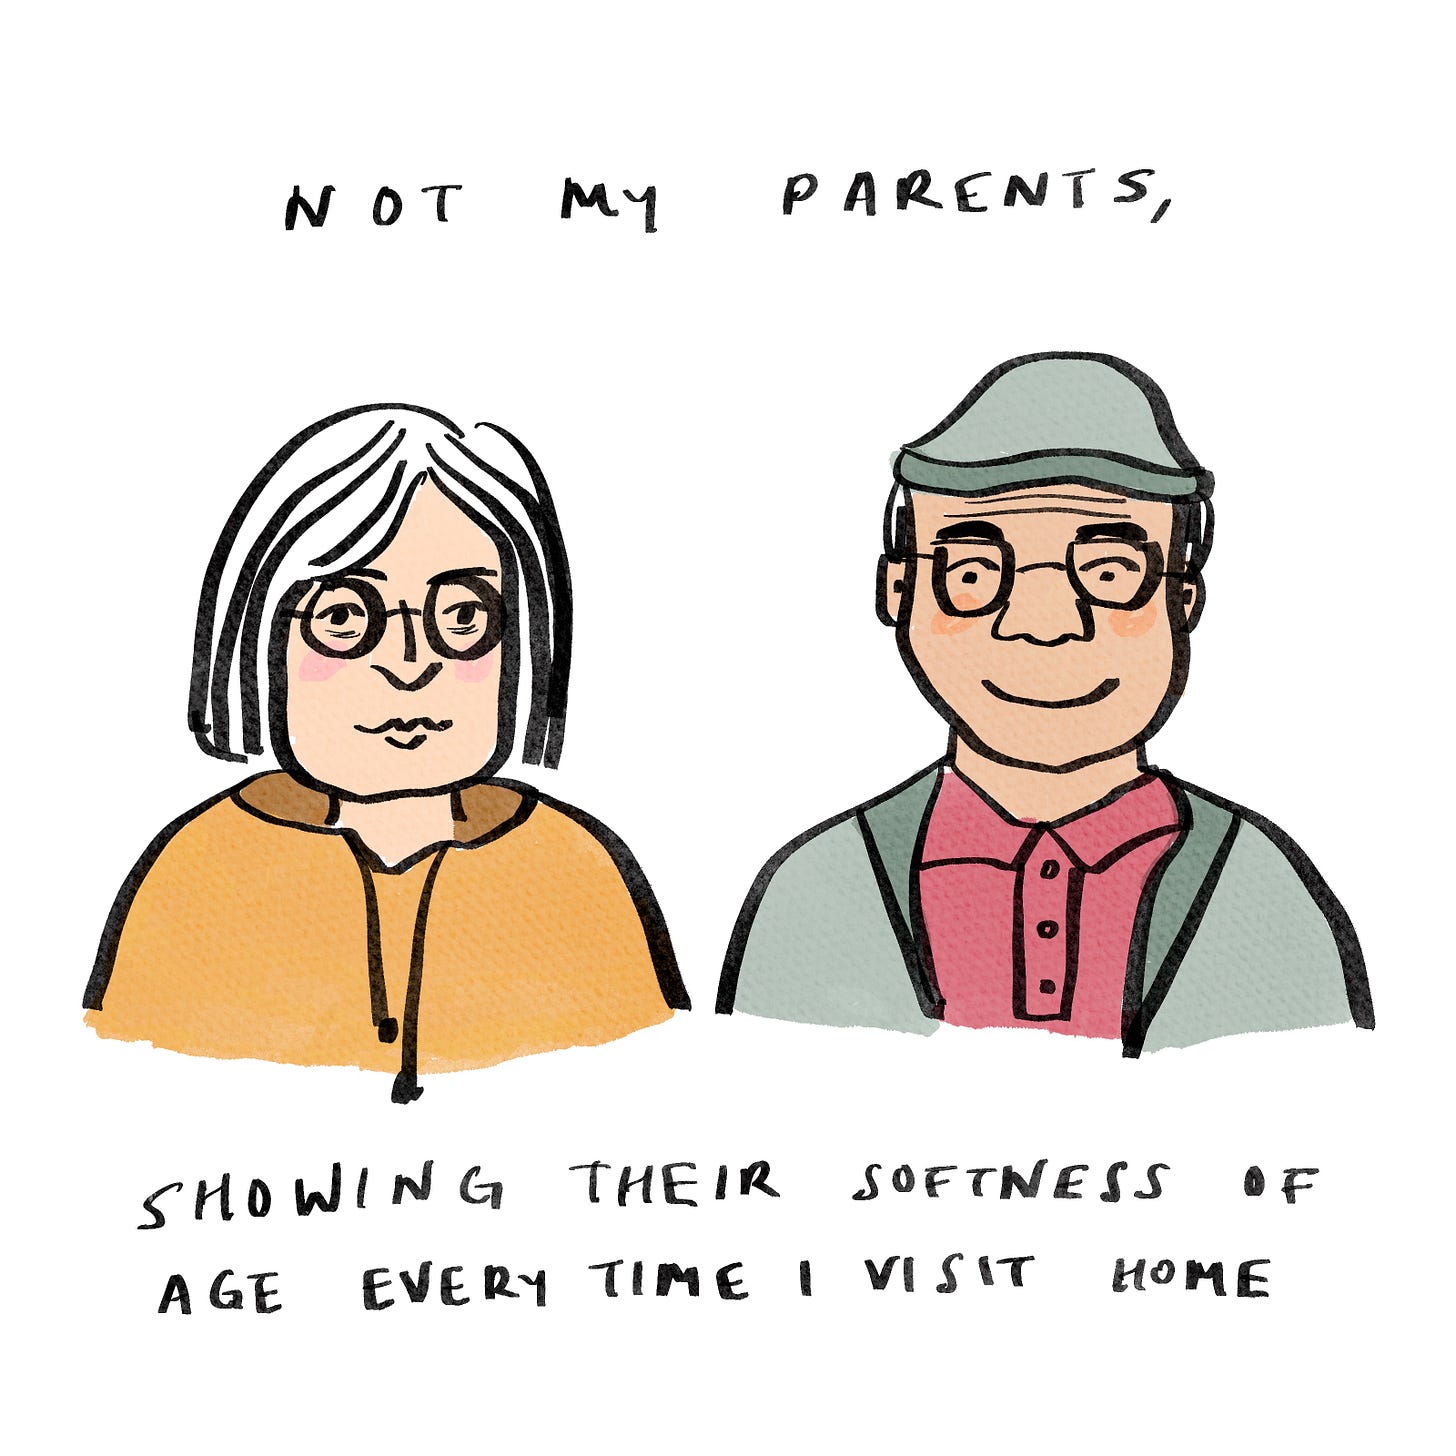 Not my parents, showing their softness of age every time I visit home